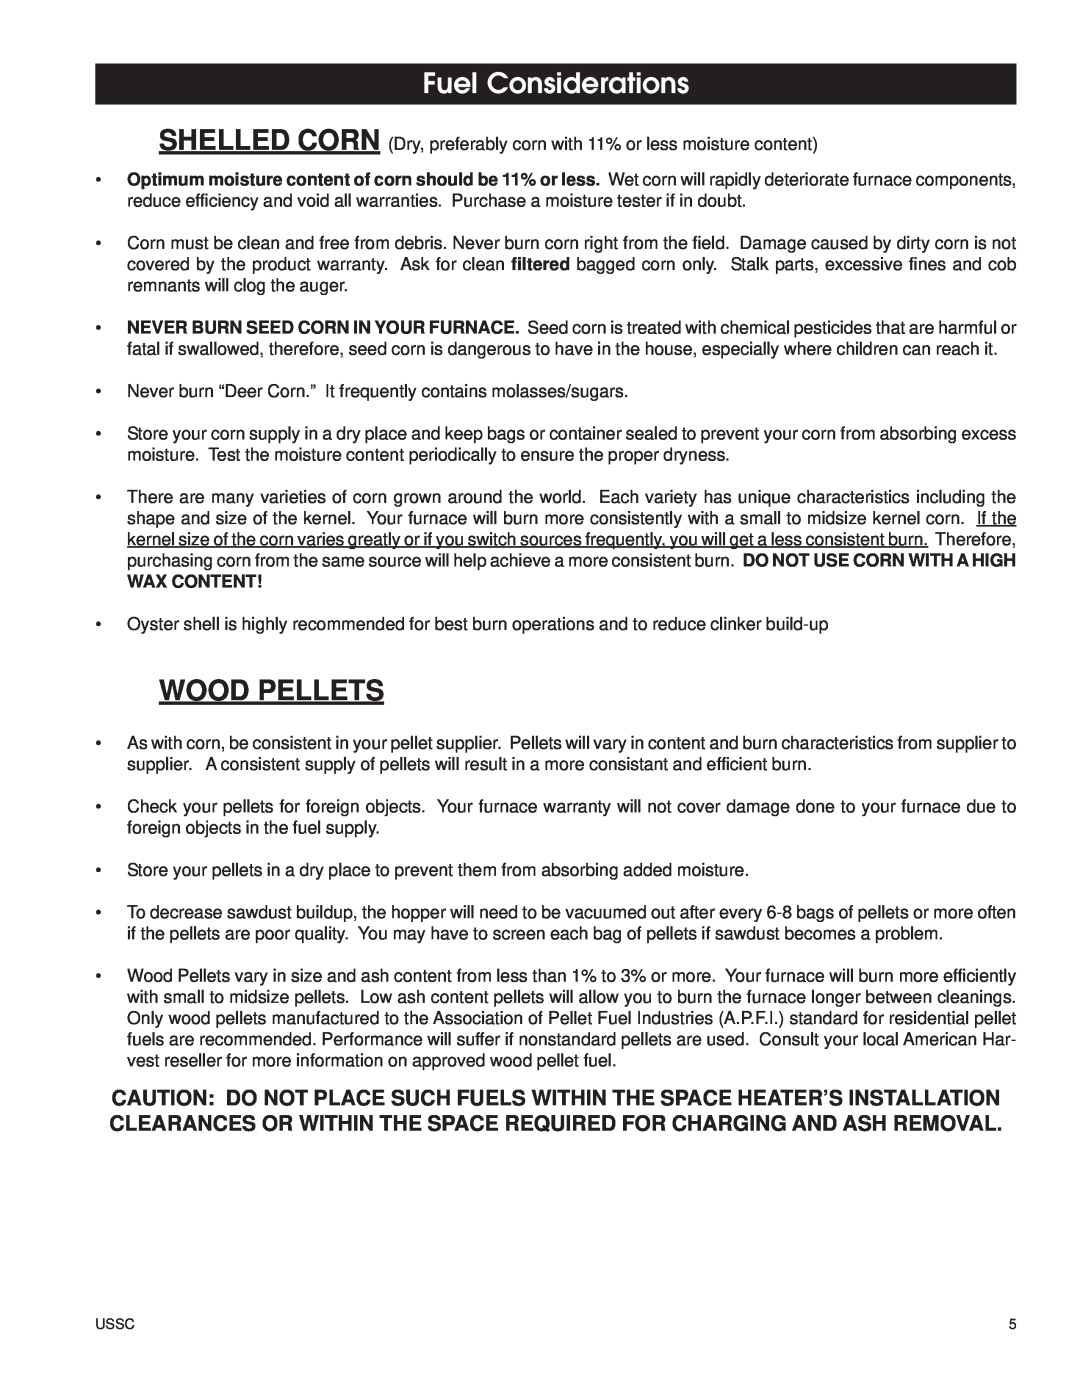 United States Stove 6110 owner manual Fuel Considerations, Wood Pellets 